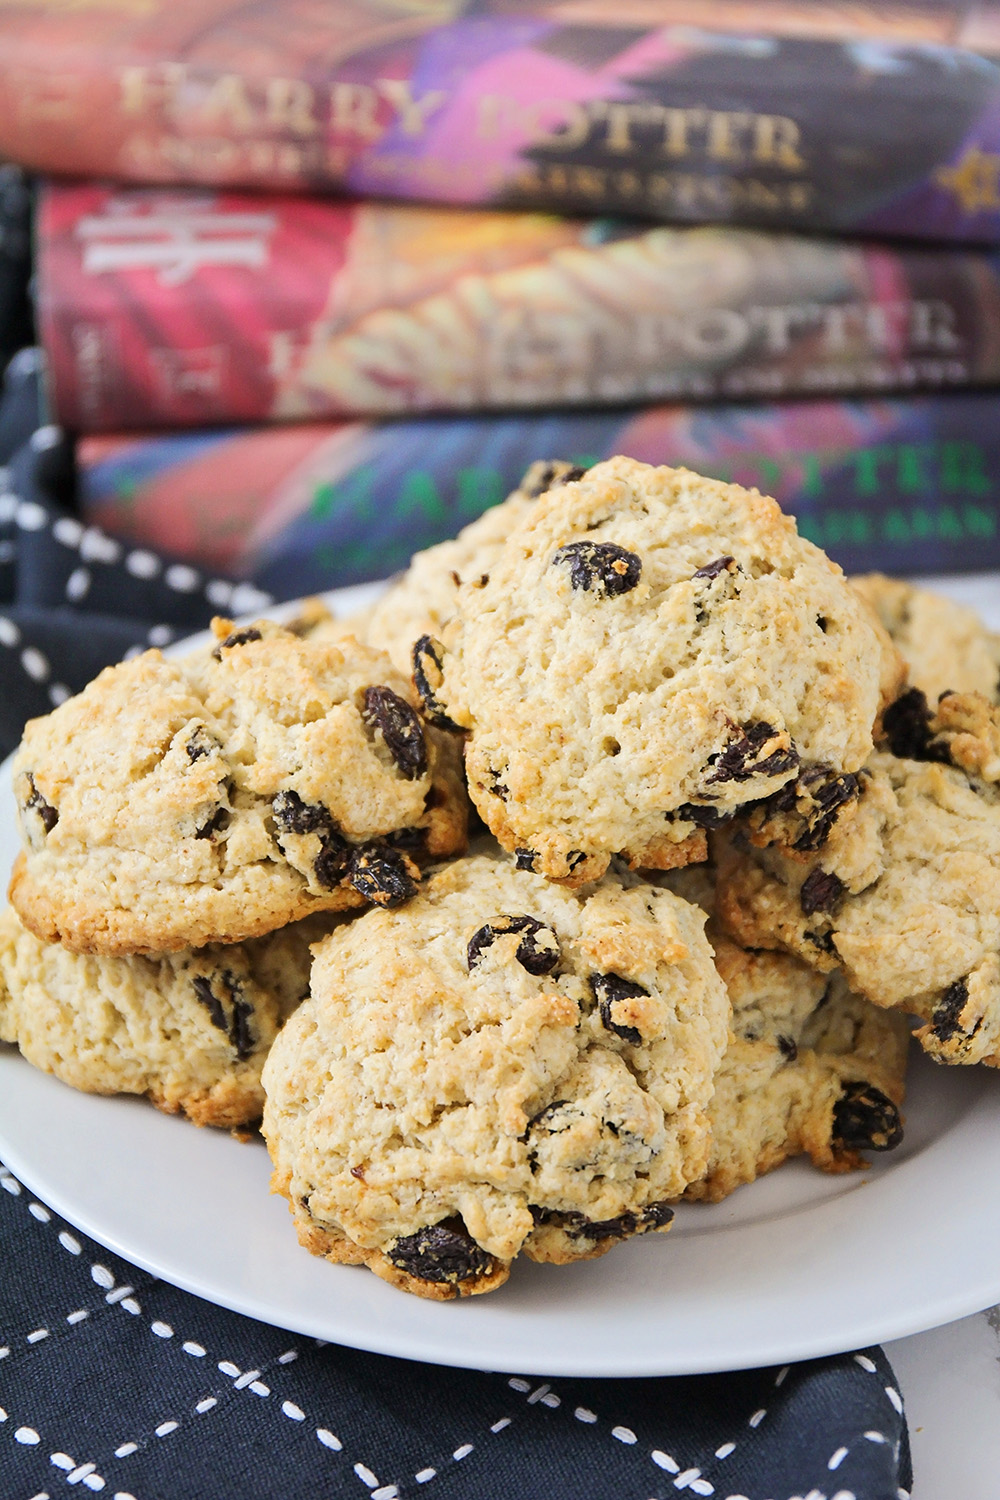 These Harry Potter-inspired rock cakes are so tender and perfectly sweetened. They're perfect for breakfast, or enjoying with a cup of tea!